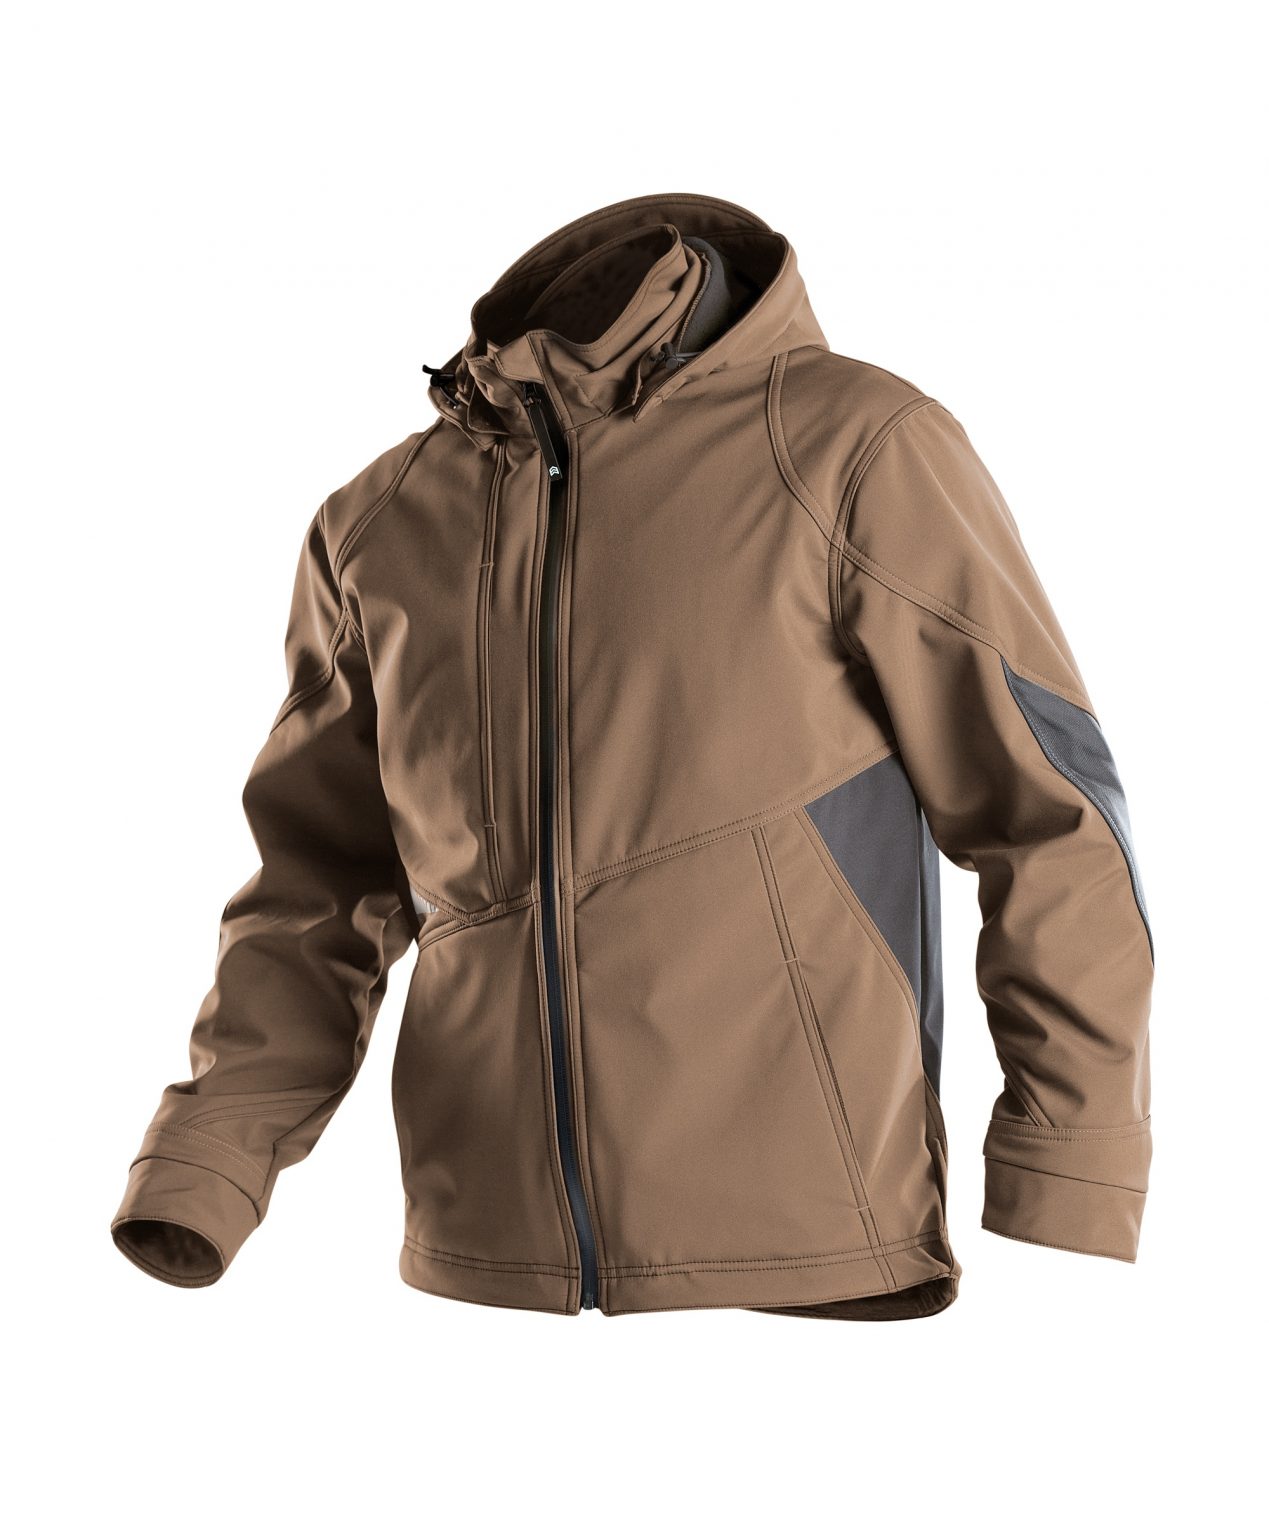 gravity softshell jacket clay brown anthracite grey detail 2